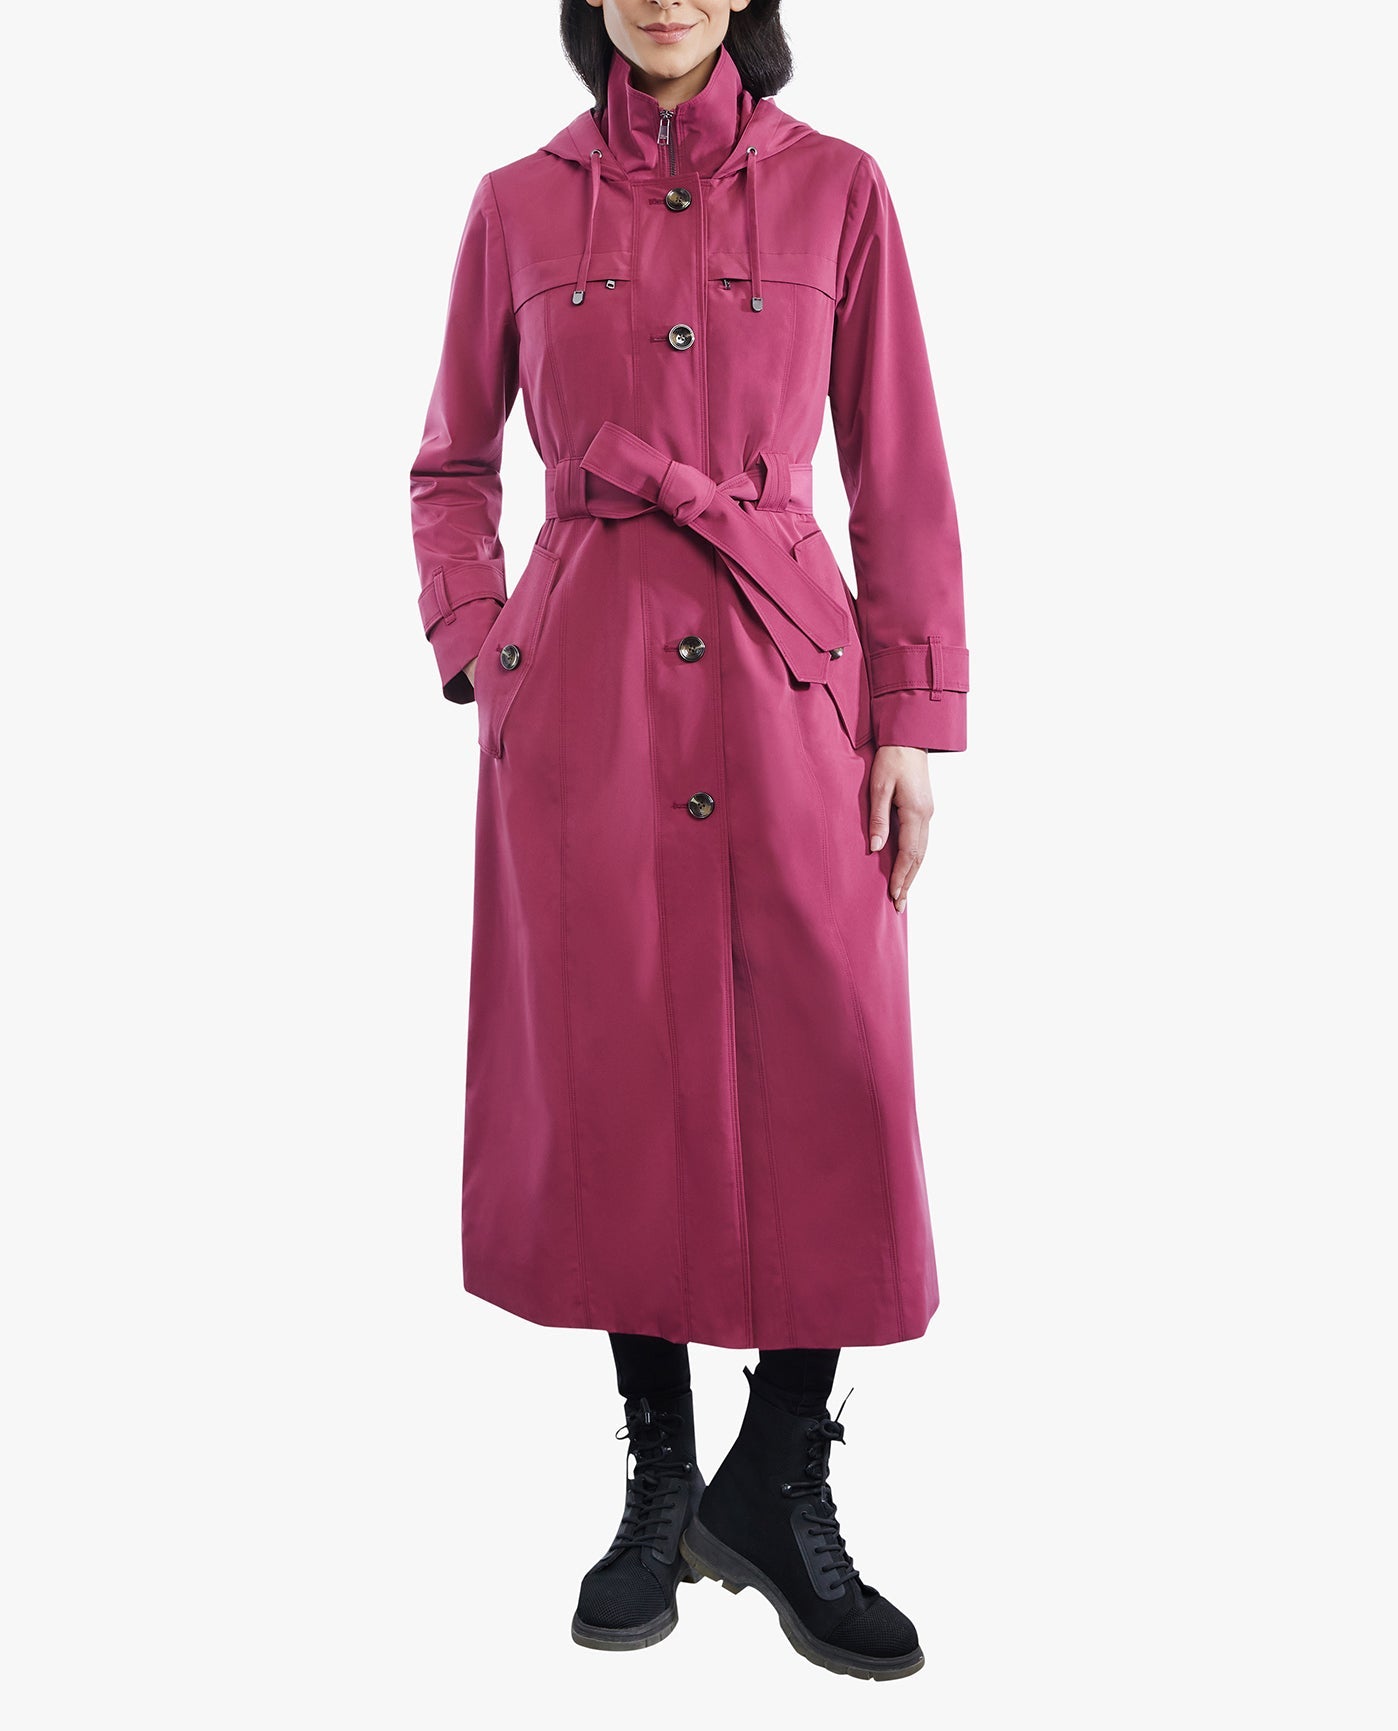 FRONT OF SINGLE BREASTED BUTTON FRONT HOODED MAXI TRENCH WITH BELT | RHUBARB